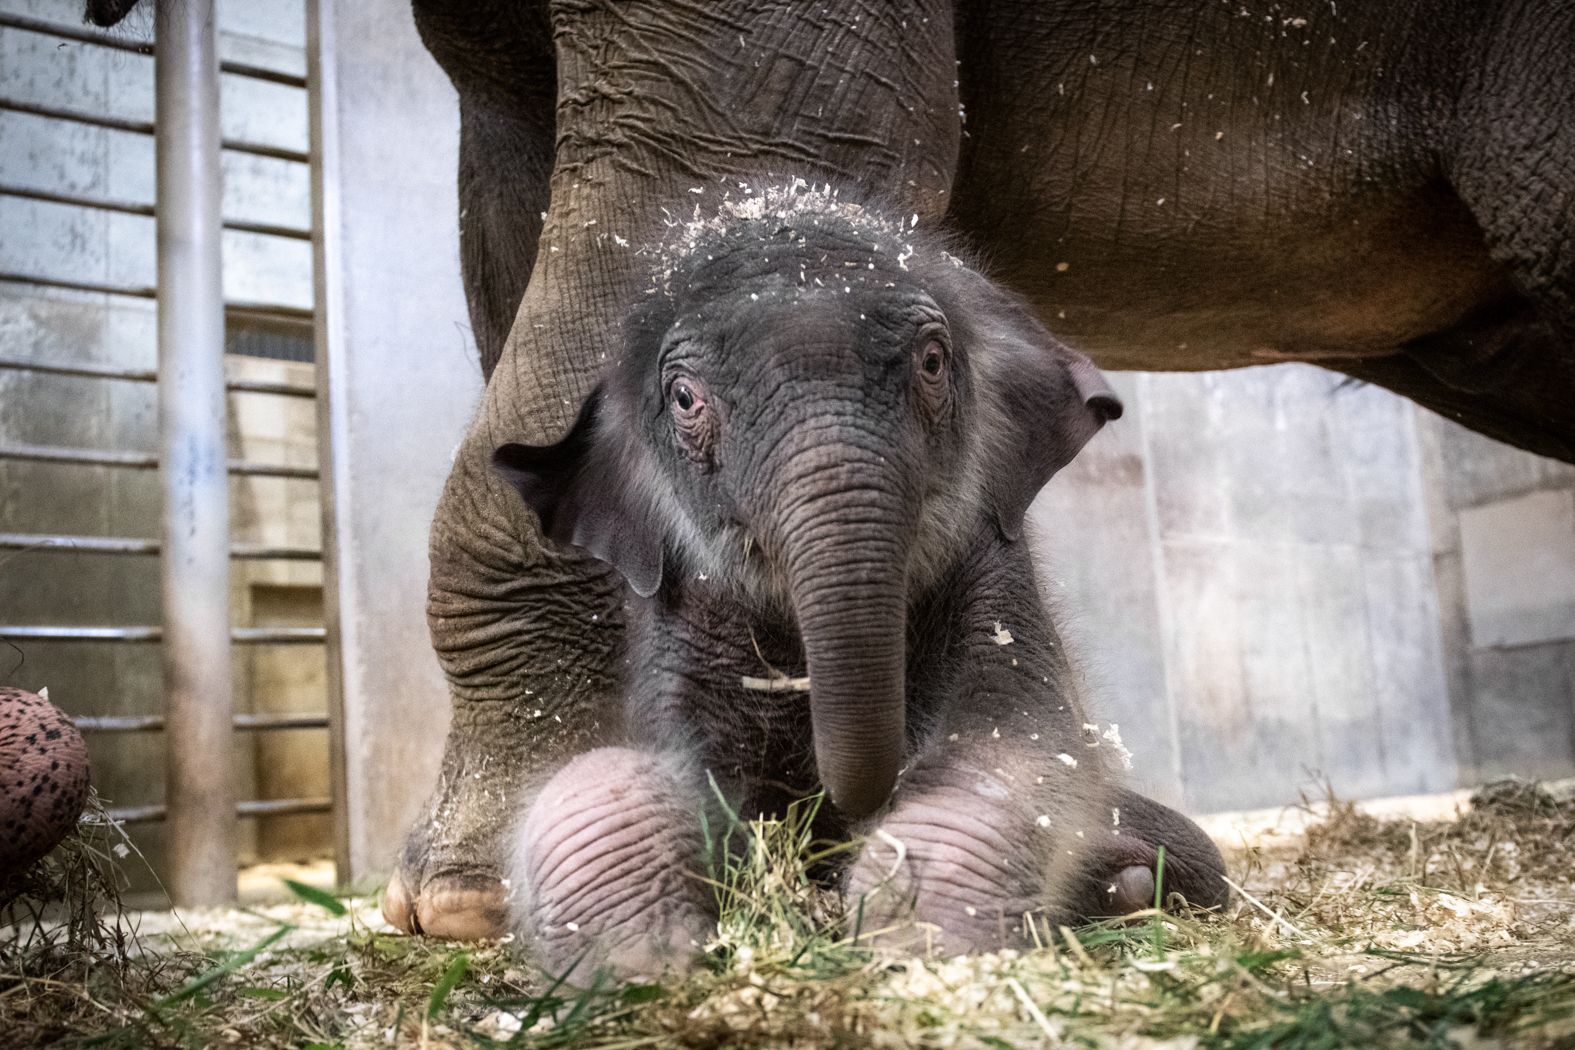 An Asian elephant calf sits in a pile of brush below his mother